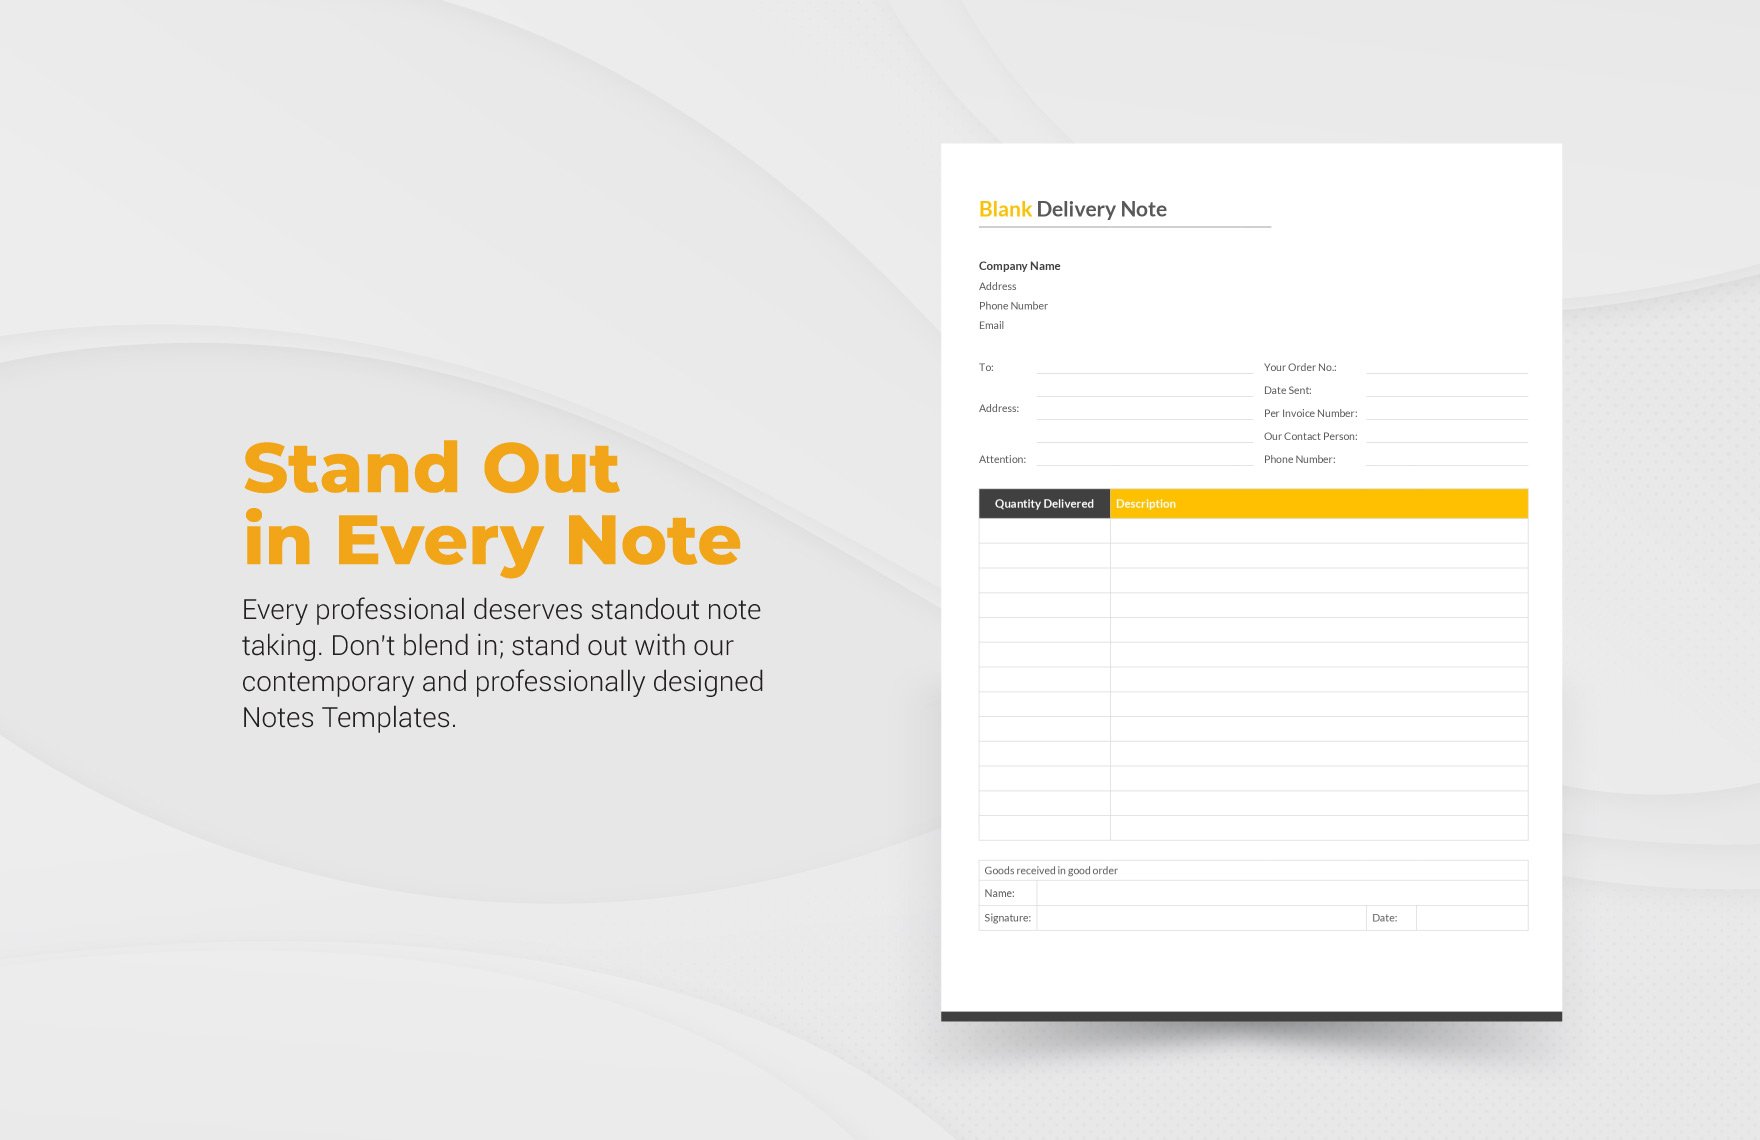 Blank Delivery Note Template